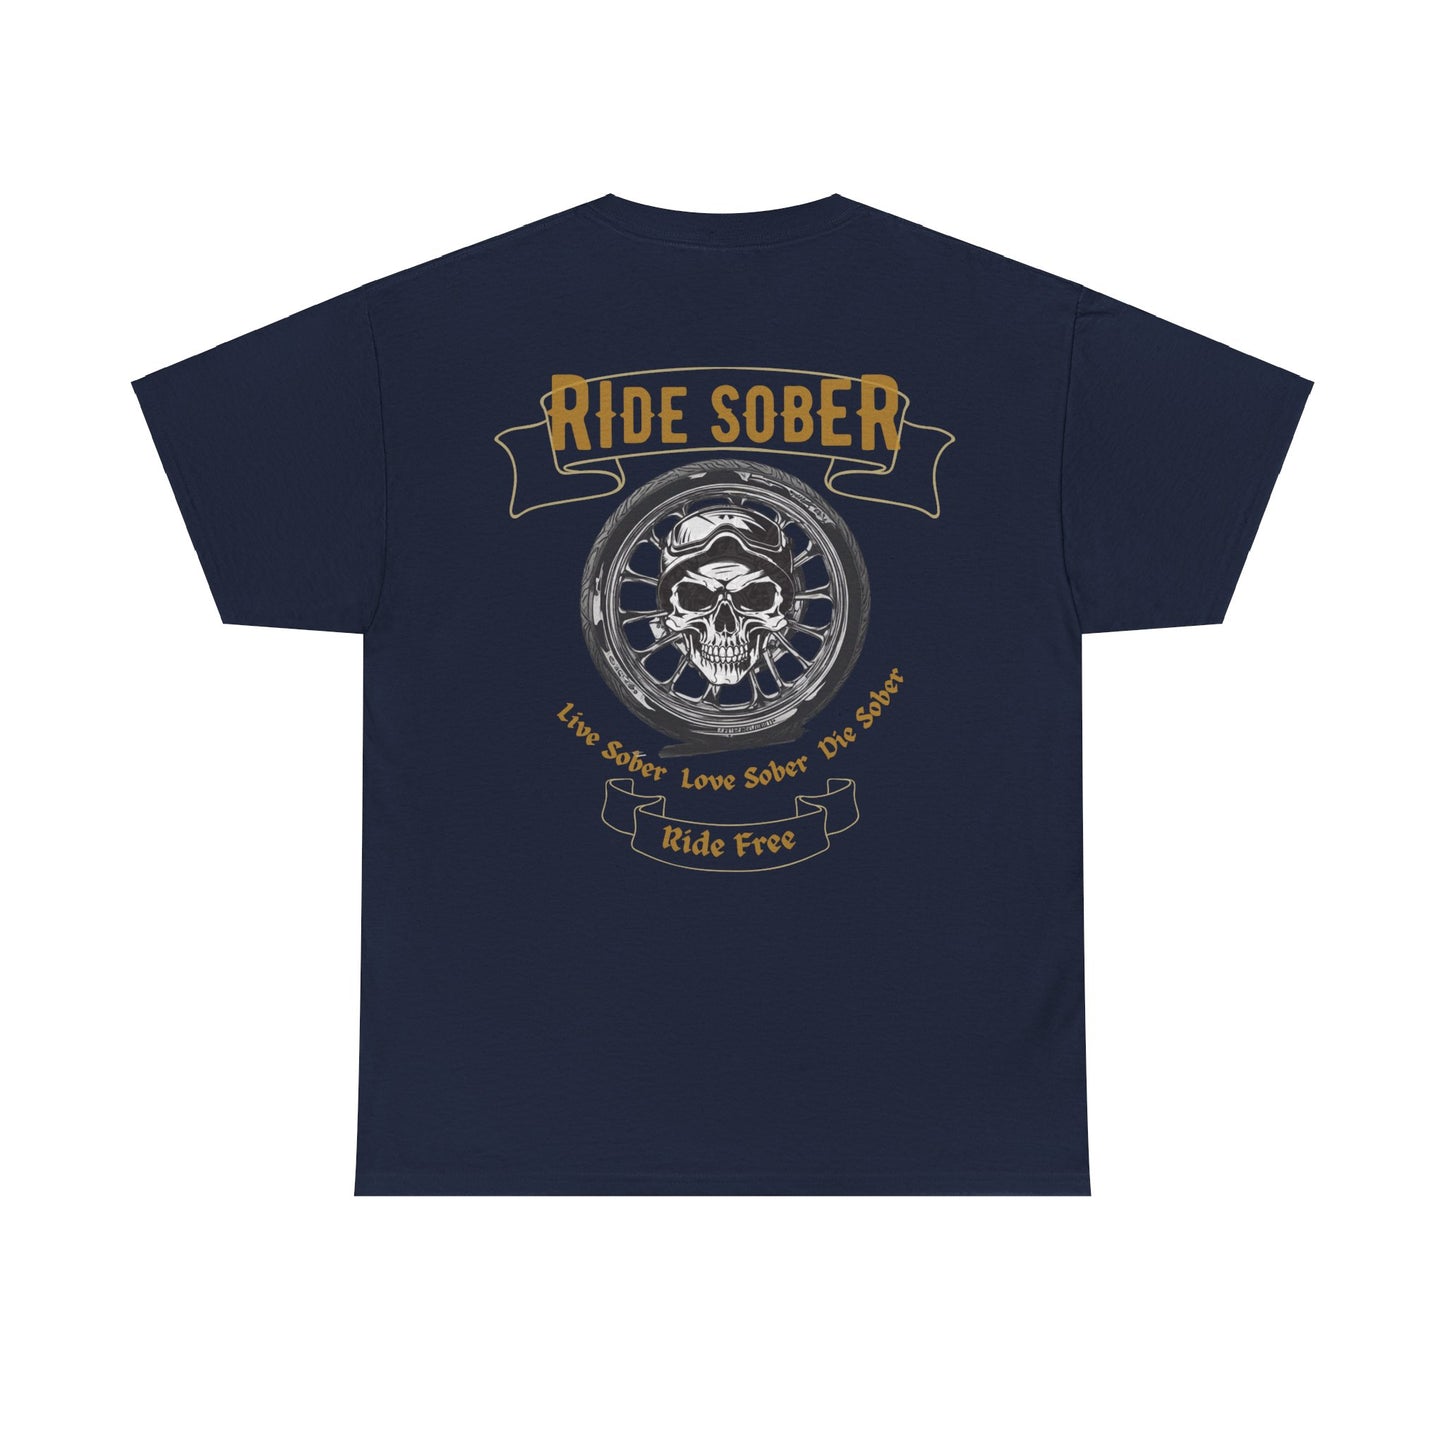 "Ride Sober Ride Free" Two-Sided Unisex Tee